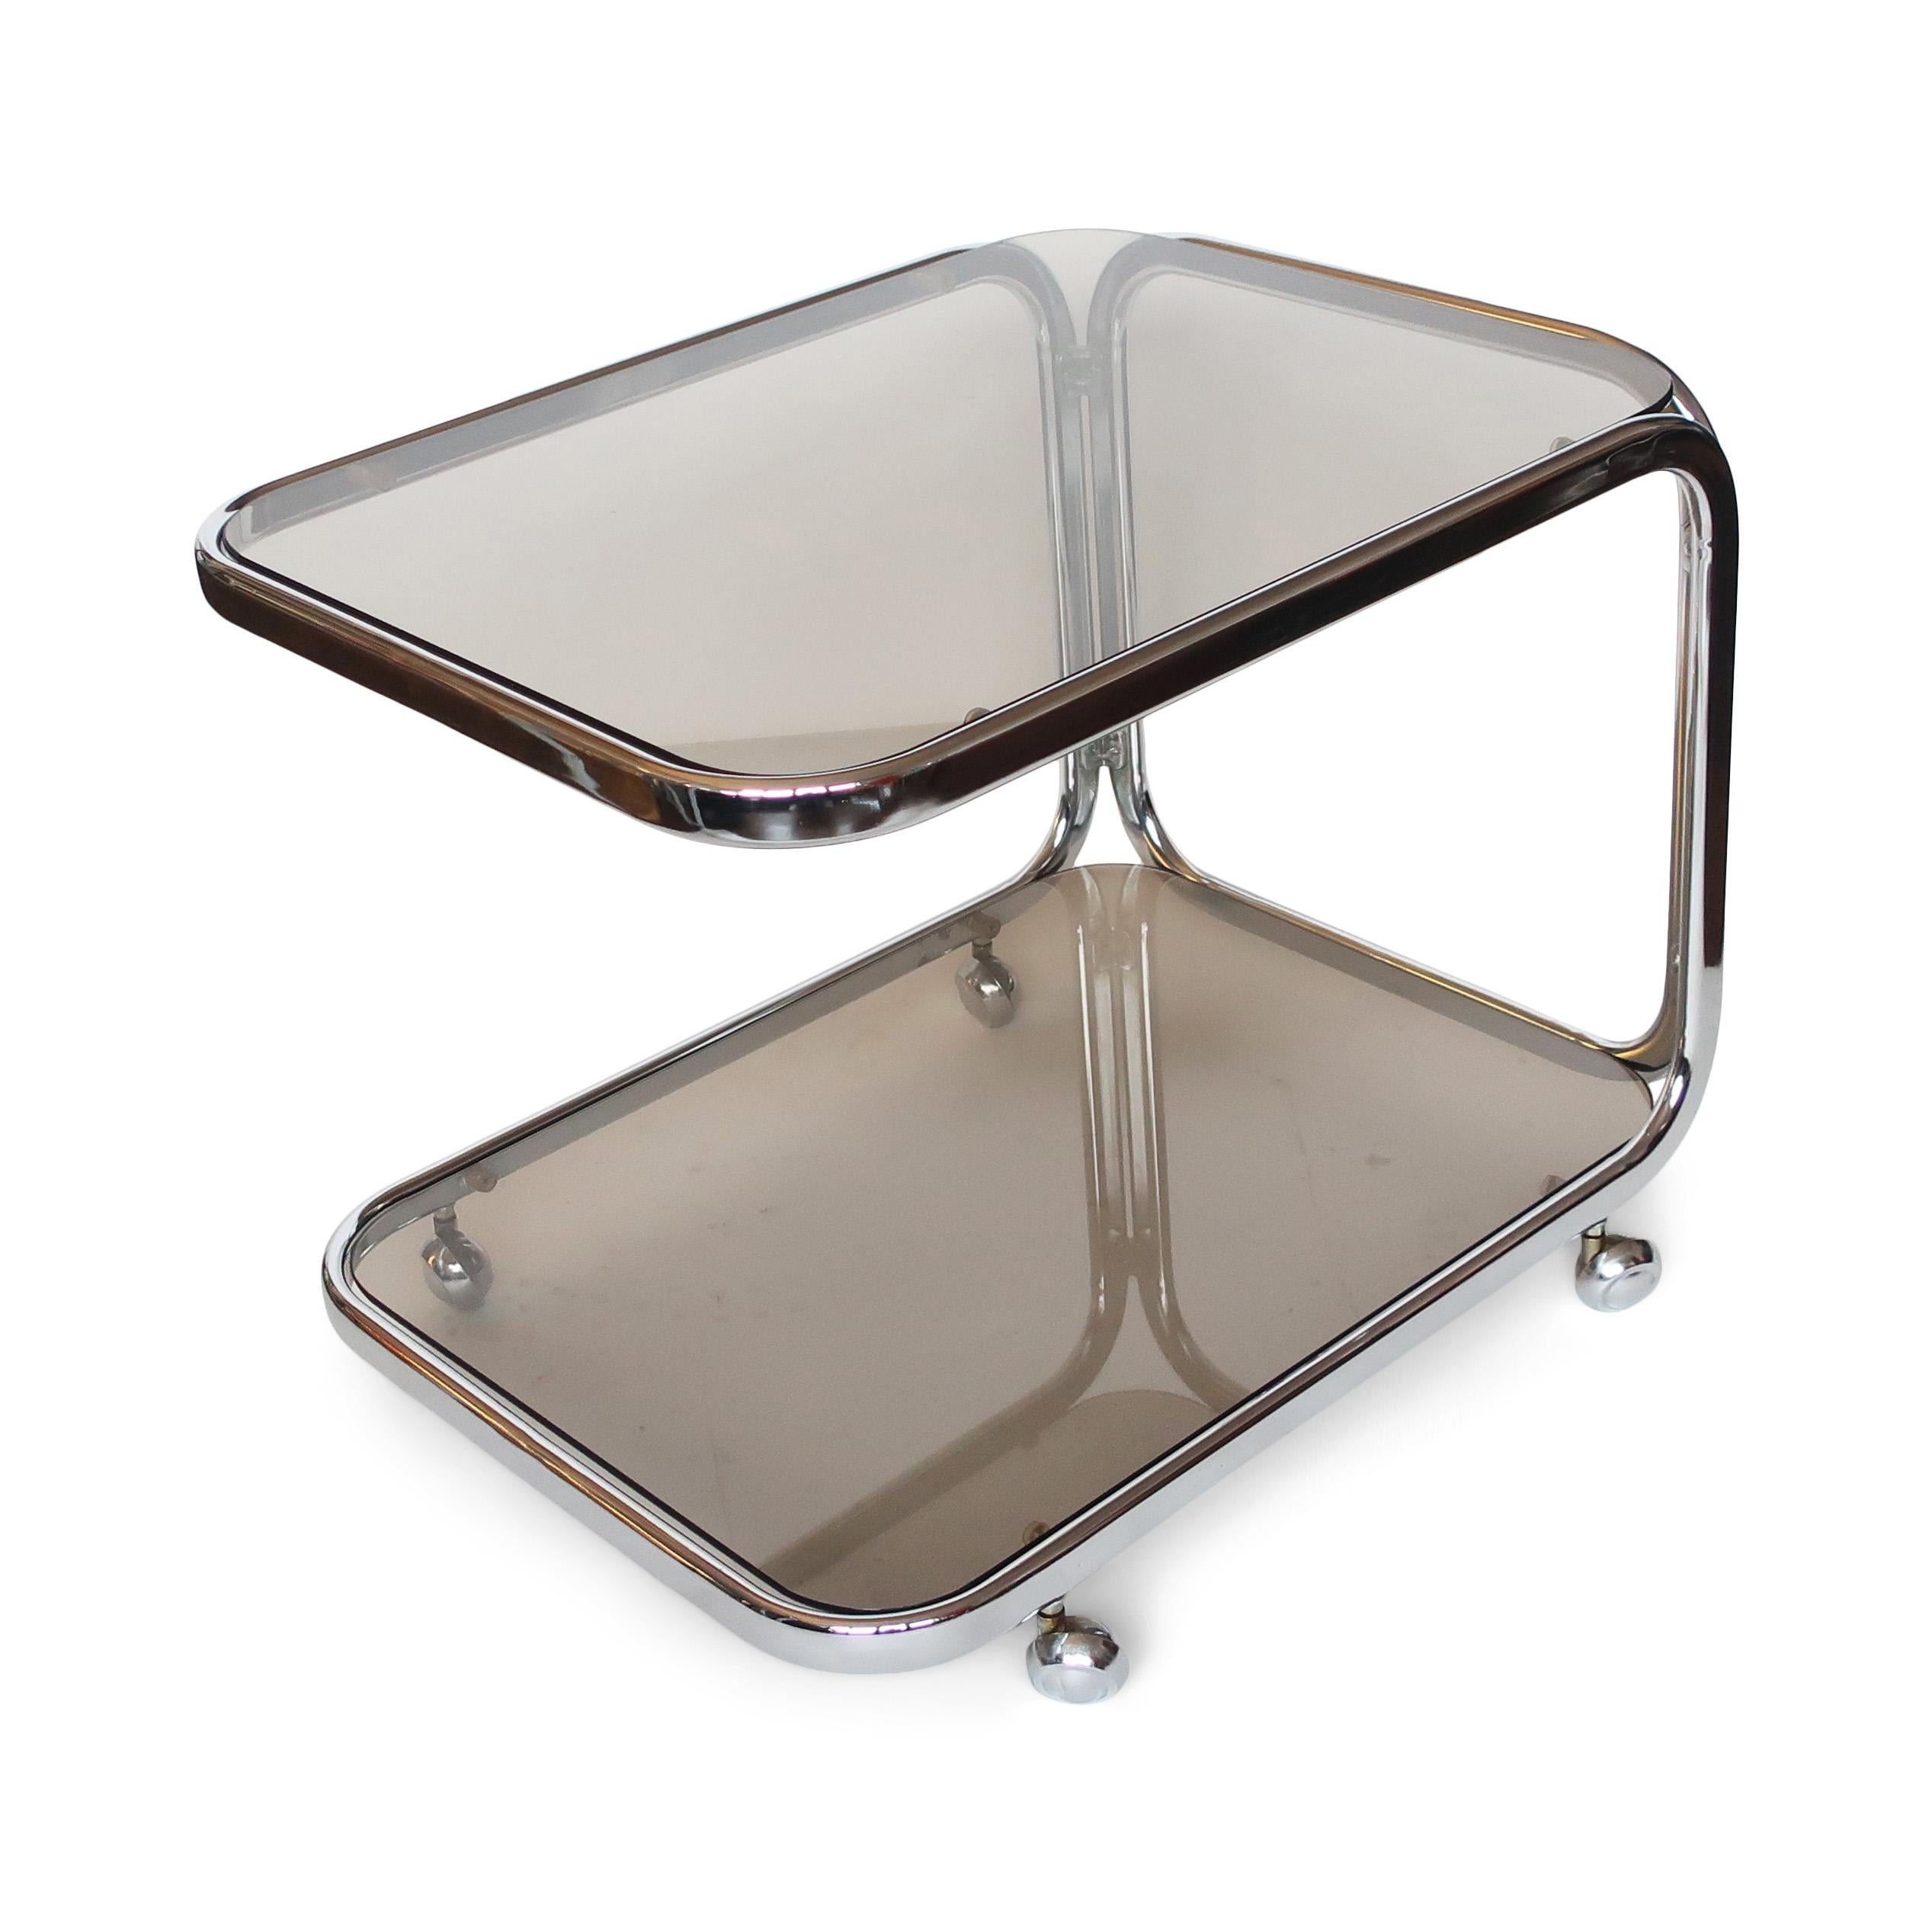 An exceptional vintage chrome and smoked glass bar cart that couldn’t be much more perfectly vintage 1970s. Sensuous curved chrome lines, chrome casters, and two mysterious and smokey glass shelves. The two tiers of the drinks cart provide plenty of